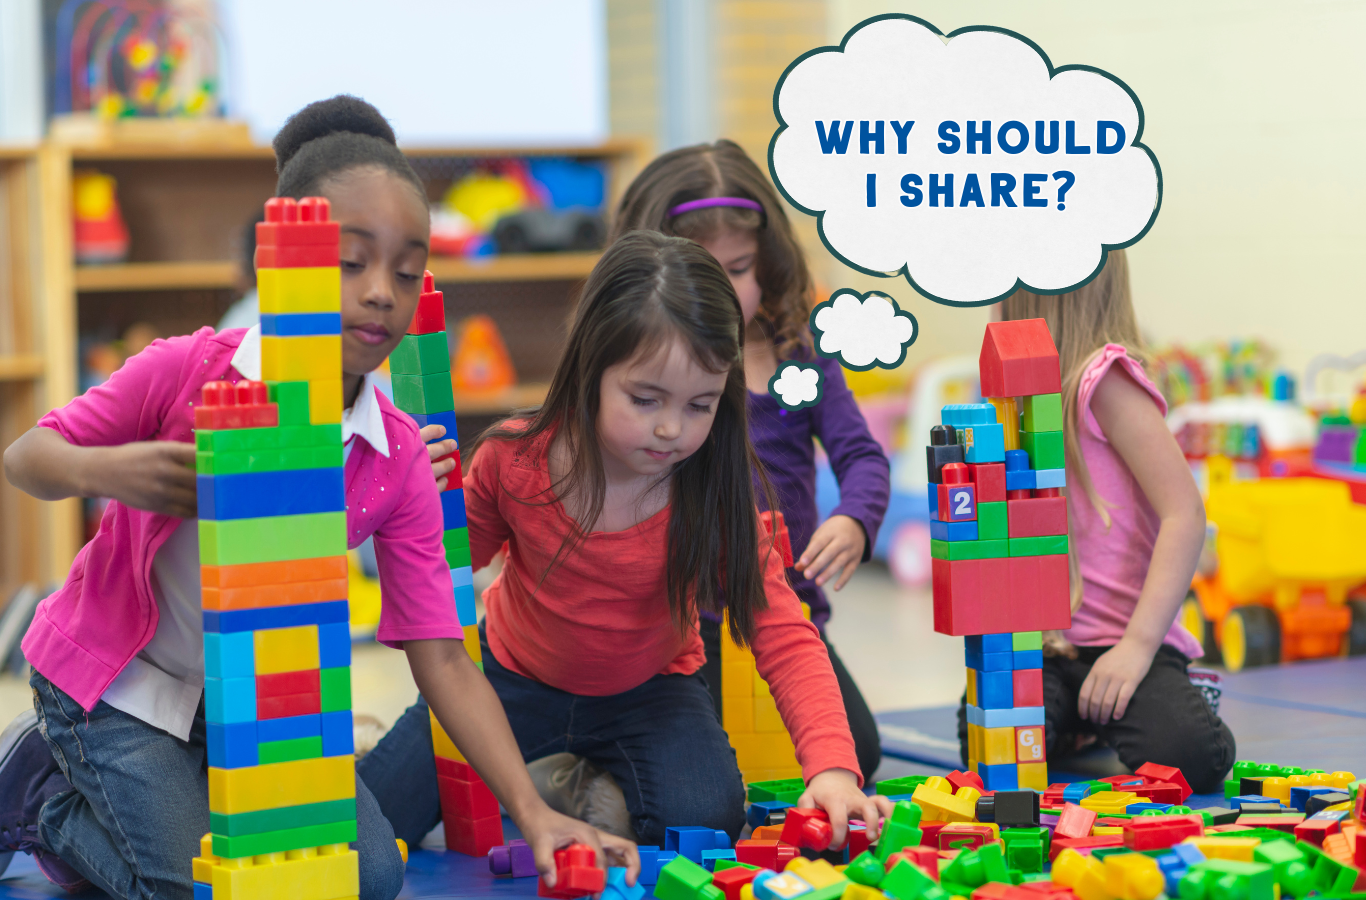 Two little girls playing with building blocks while one girl thinks "Why should I share?"